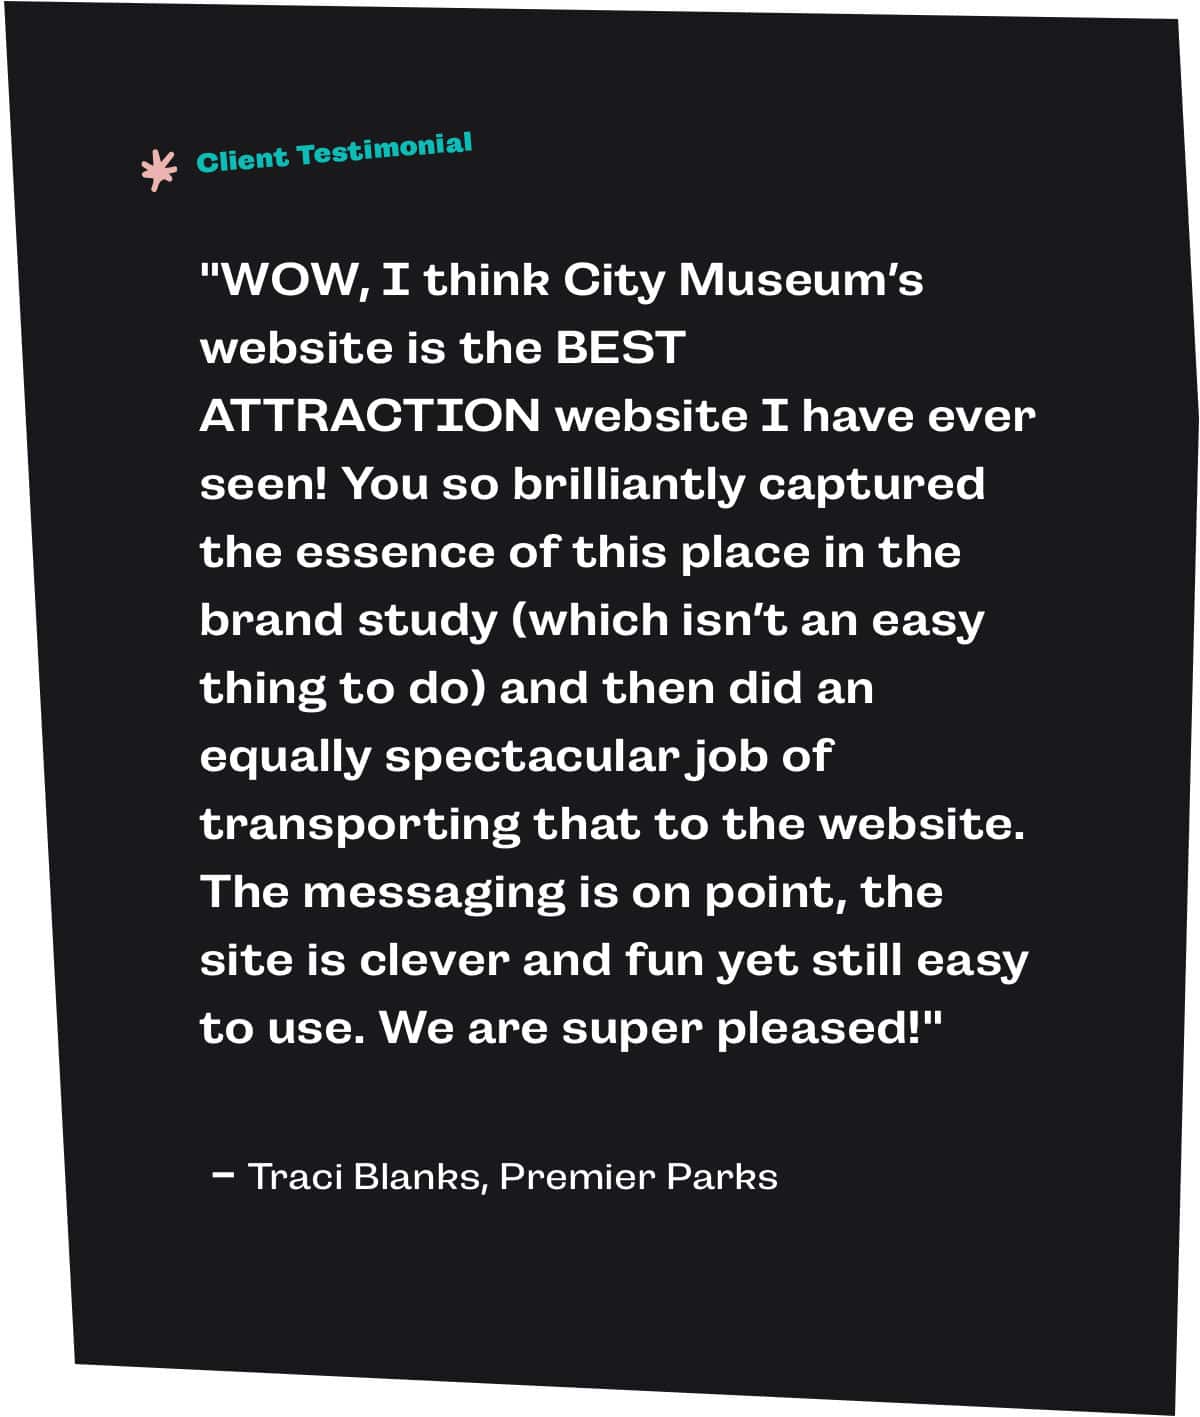 "WOW, I think City Museum’s website is the BEST ATTRACTION website I have ever seen! You so brilliantly captured the essence of this place in the brand study (which isn’t an easy thing to do) and then did an equally spectacular job of transporting that to the website. The messaging is on point, the site is clever and fun yet still easy to use. We are super pleased!" - Traci Blanks, Premier Parks